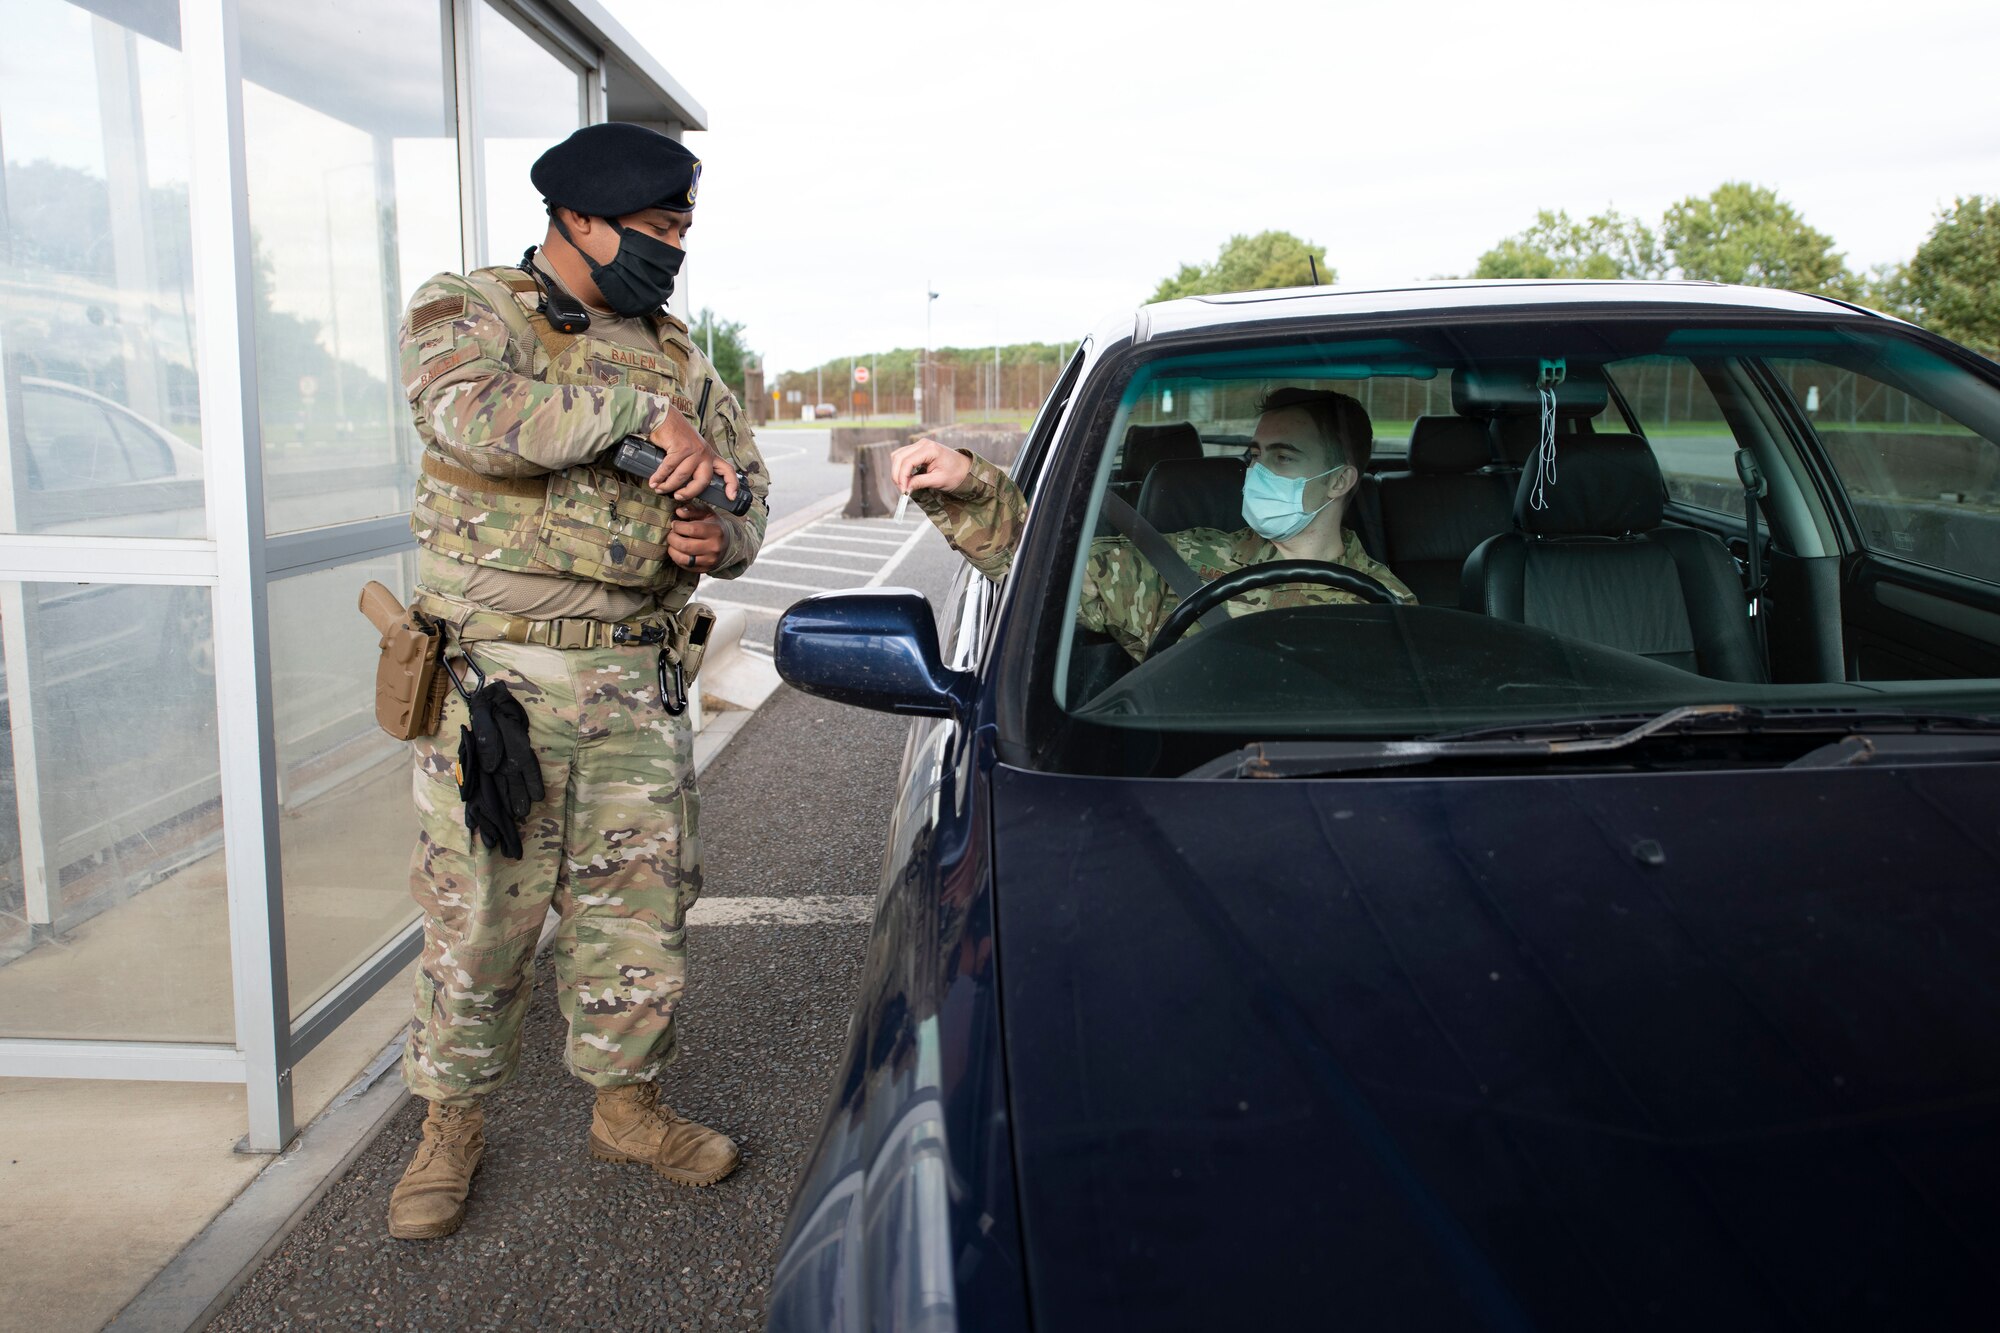 U.S. Air Force Senior Airman Isaiah Bailen, 423rd Security Forces Squadron (SFS) patrolman, scans a common access card at entry gate during a simulated training at RAF Molesworth, England, July 28, 2020. 423rd SFS defenders conduct regular training and exercises to ensure mission readiness. (U.S. Air Force photo by Airman 1st Class Jennifer Zima)